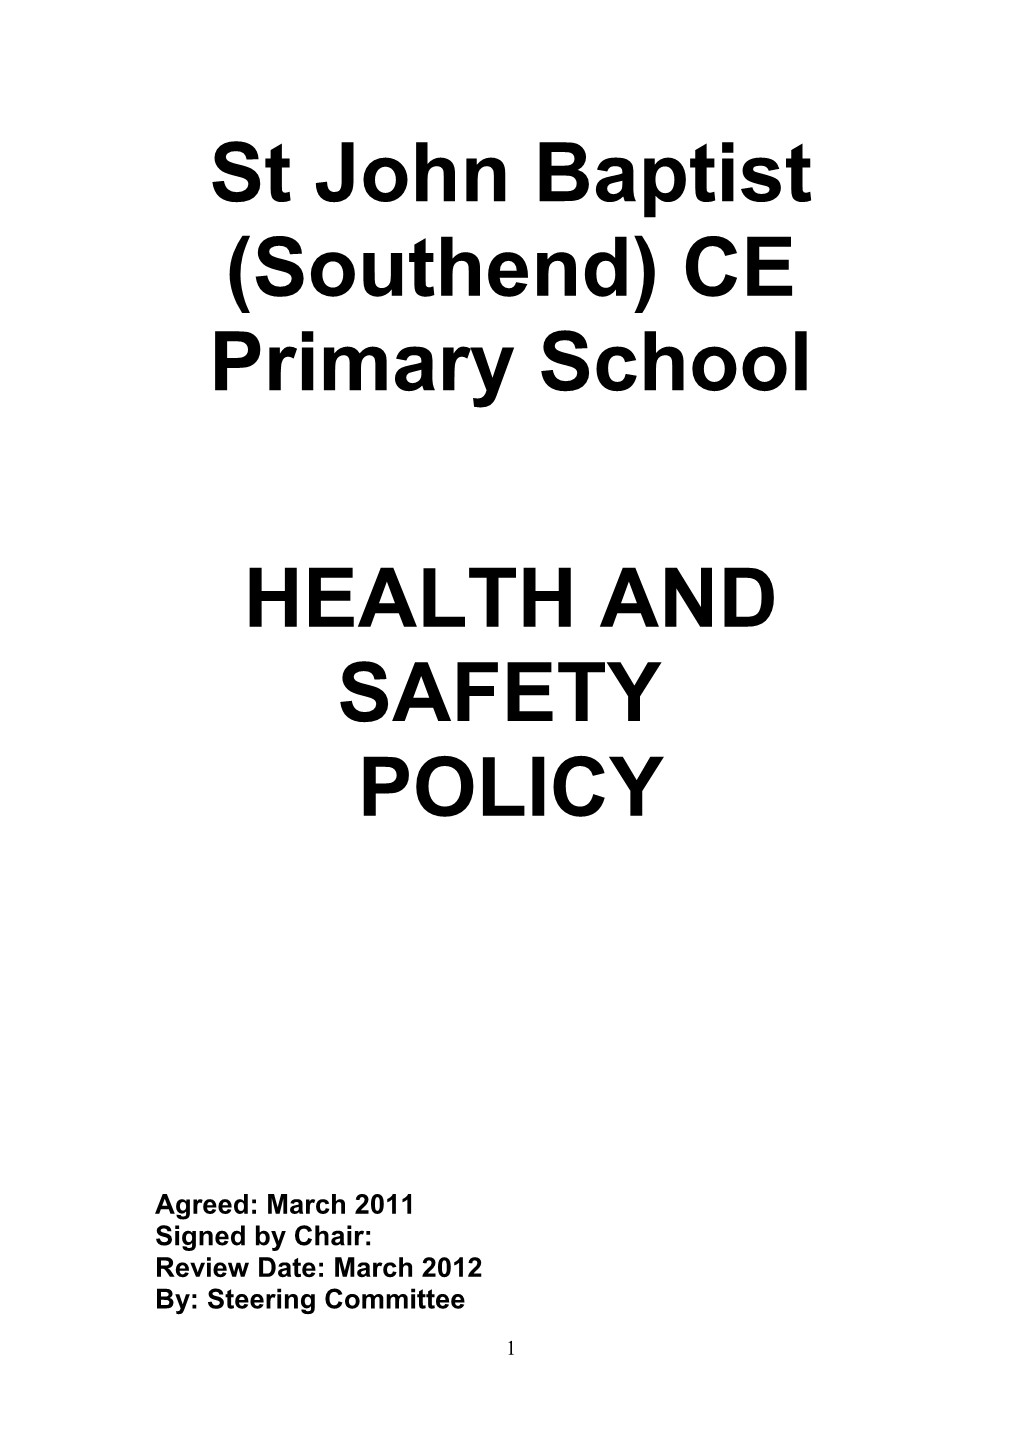 St John Baptist School - Health and Safety Policy